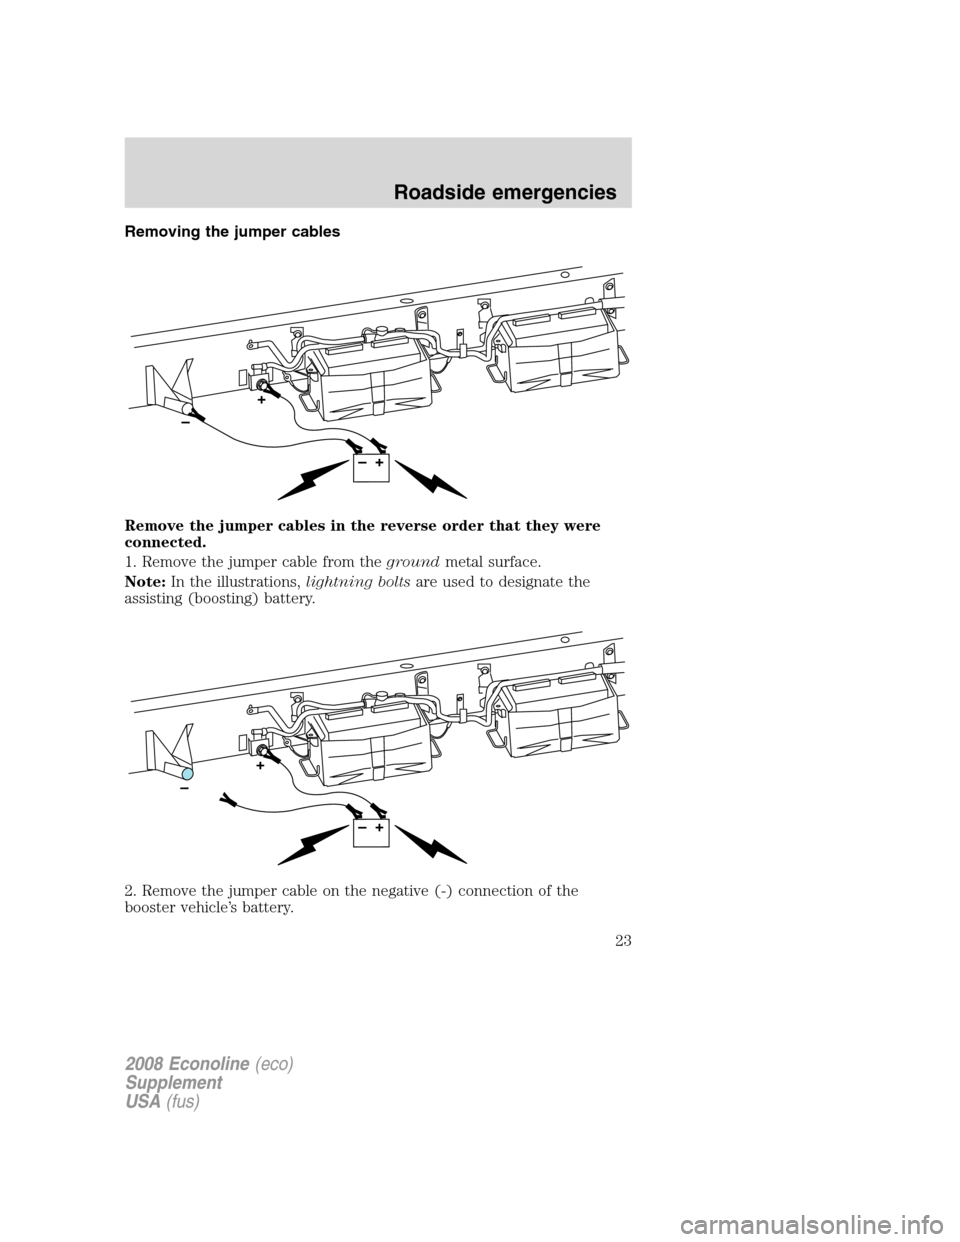 FORD SUPER DUTY 2008 2.G Diesel Supplement Manual Removing the jumper cables
Remove the jumper cables in the reverse order that they were
connected.
1. Remove the jumper cable from thegroundmetal surface.
Note:In the illustrations,lightning boltsare 